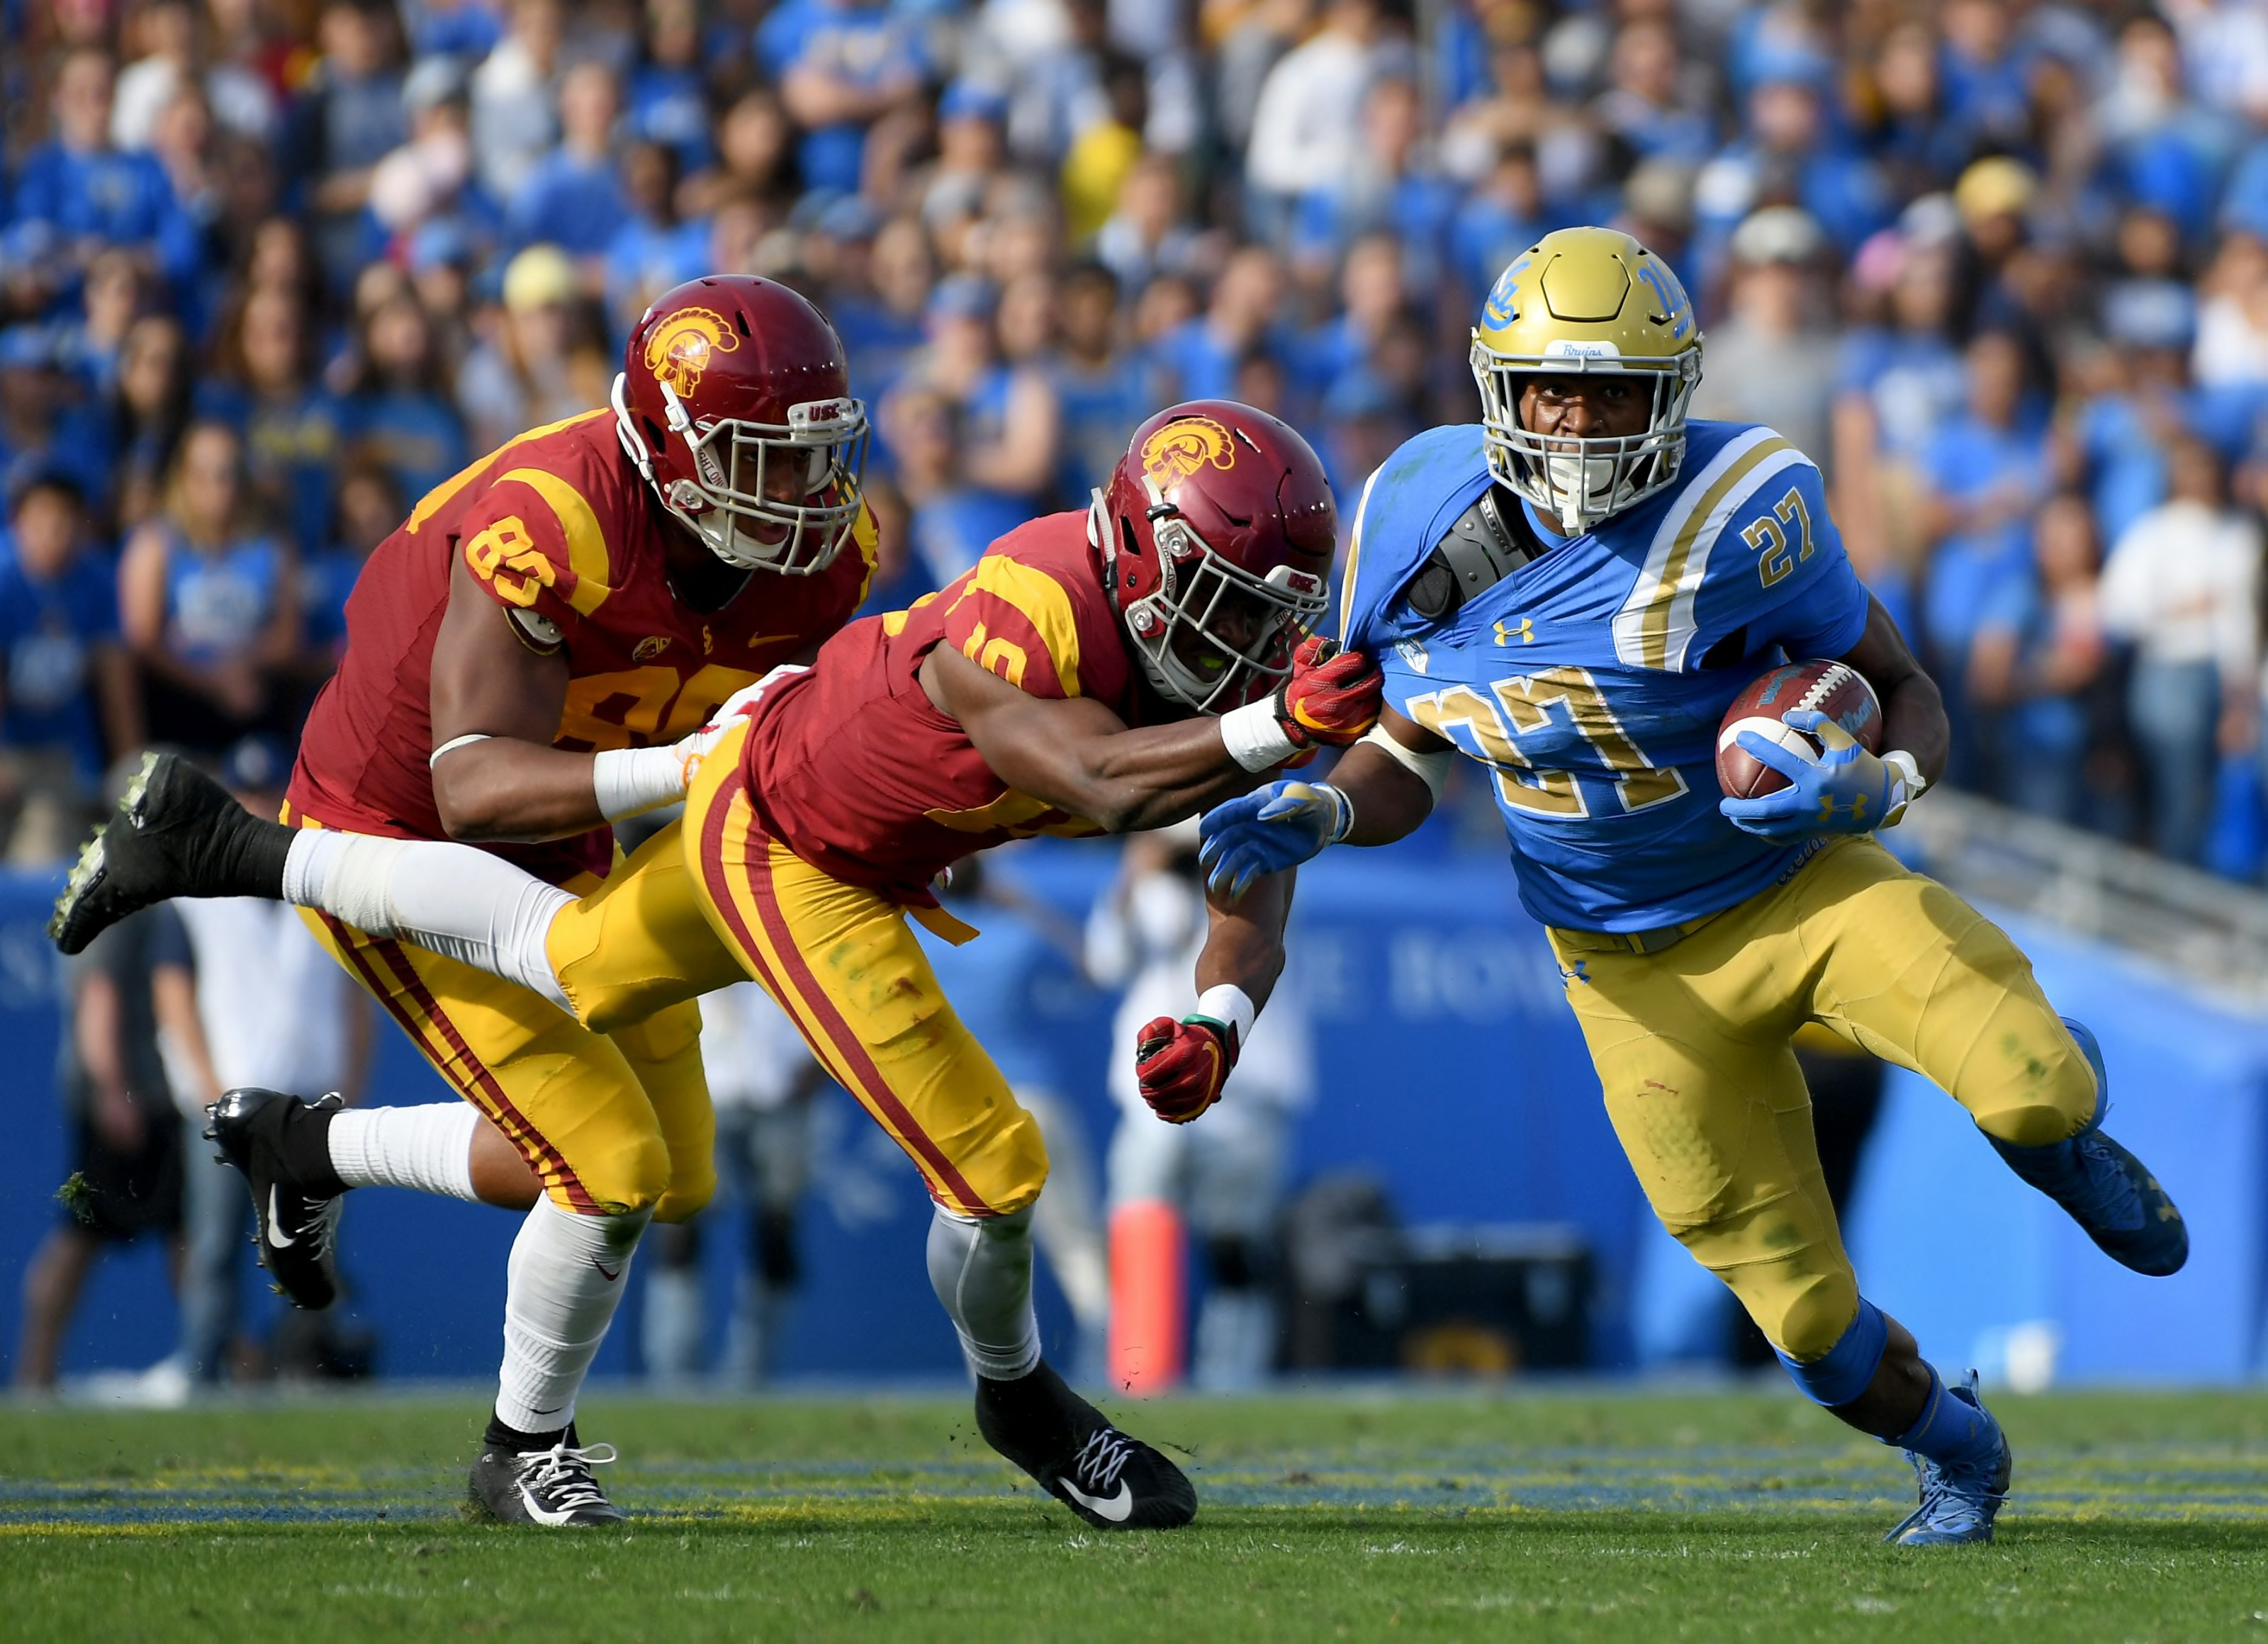 Ranking the 2019 USC football schedule by threat level - Page 5